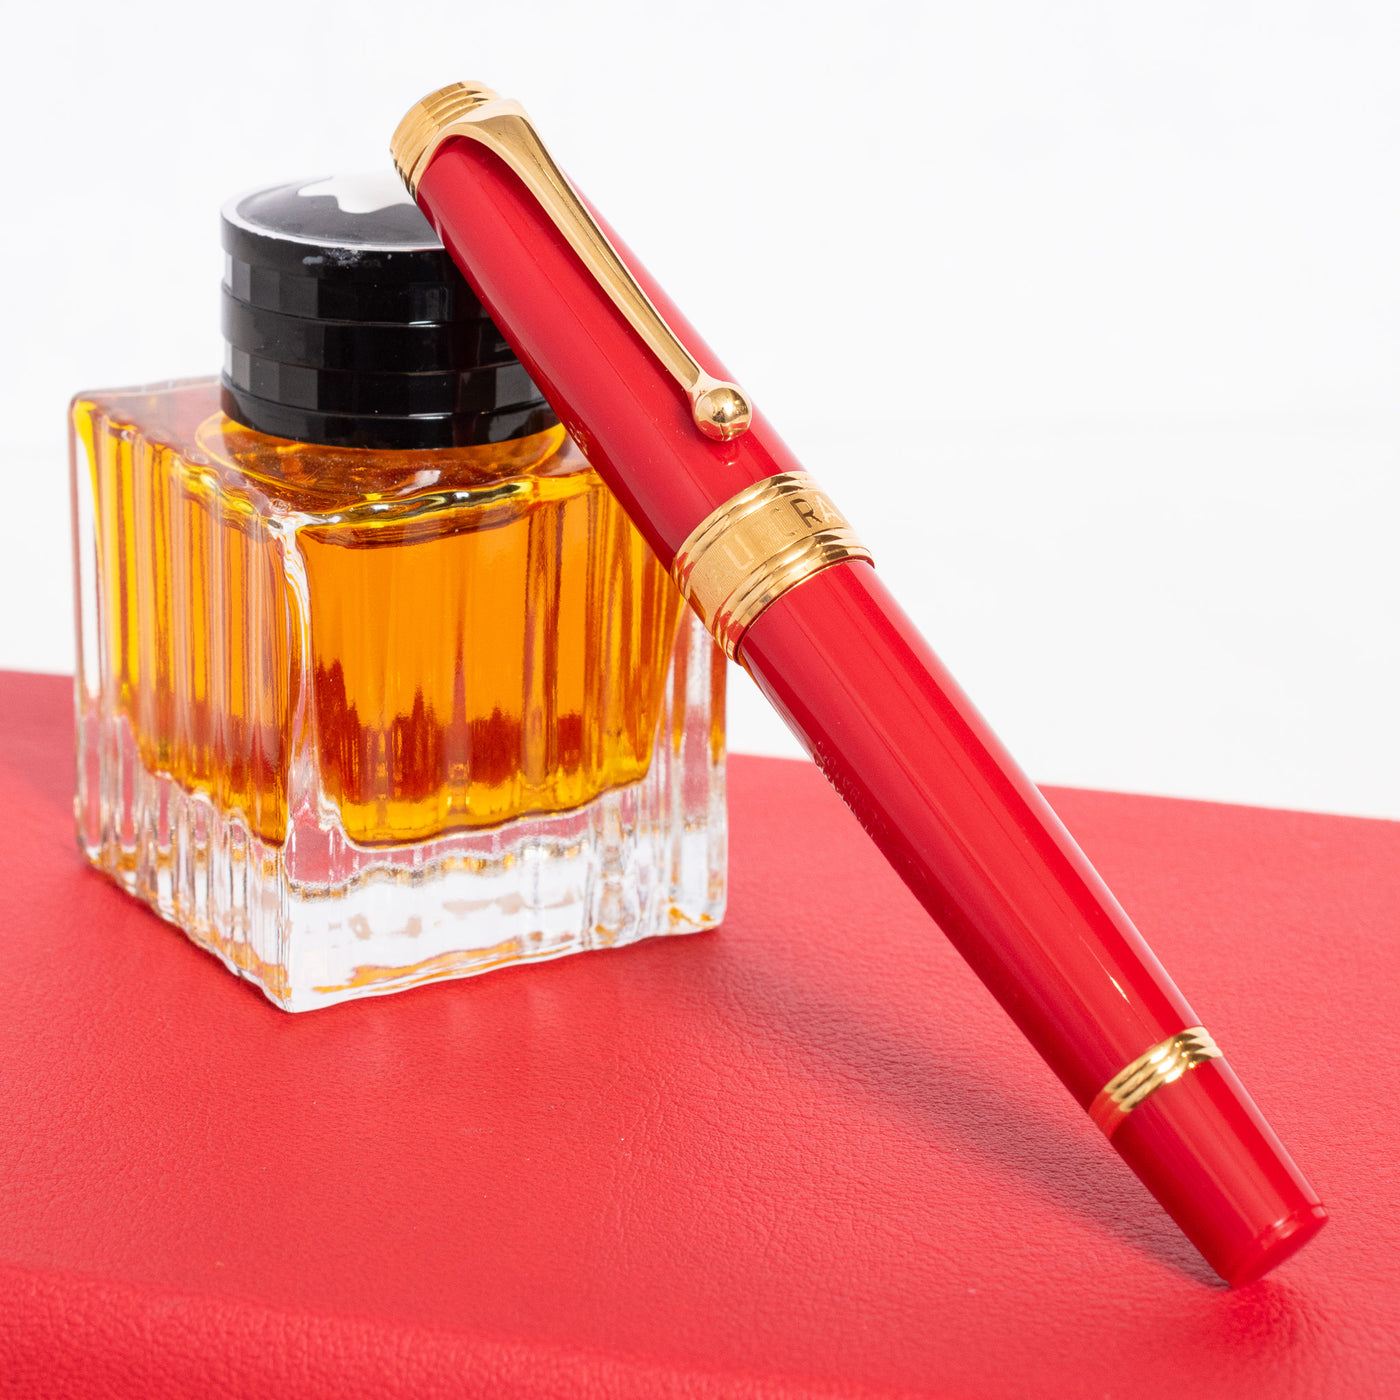 Aurora 1997 Limited Edition Italian Flag Red Fountain Pen capped